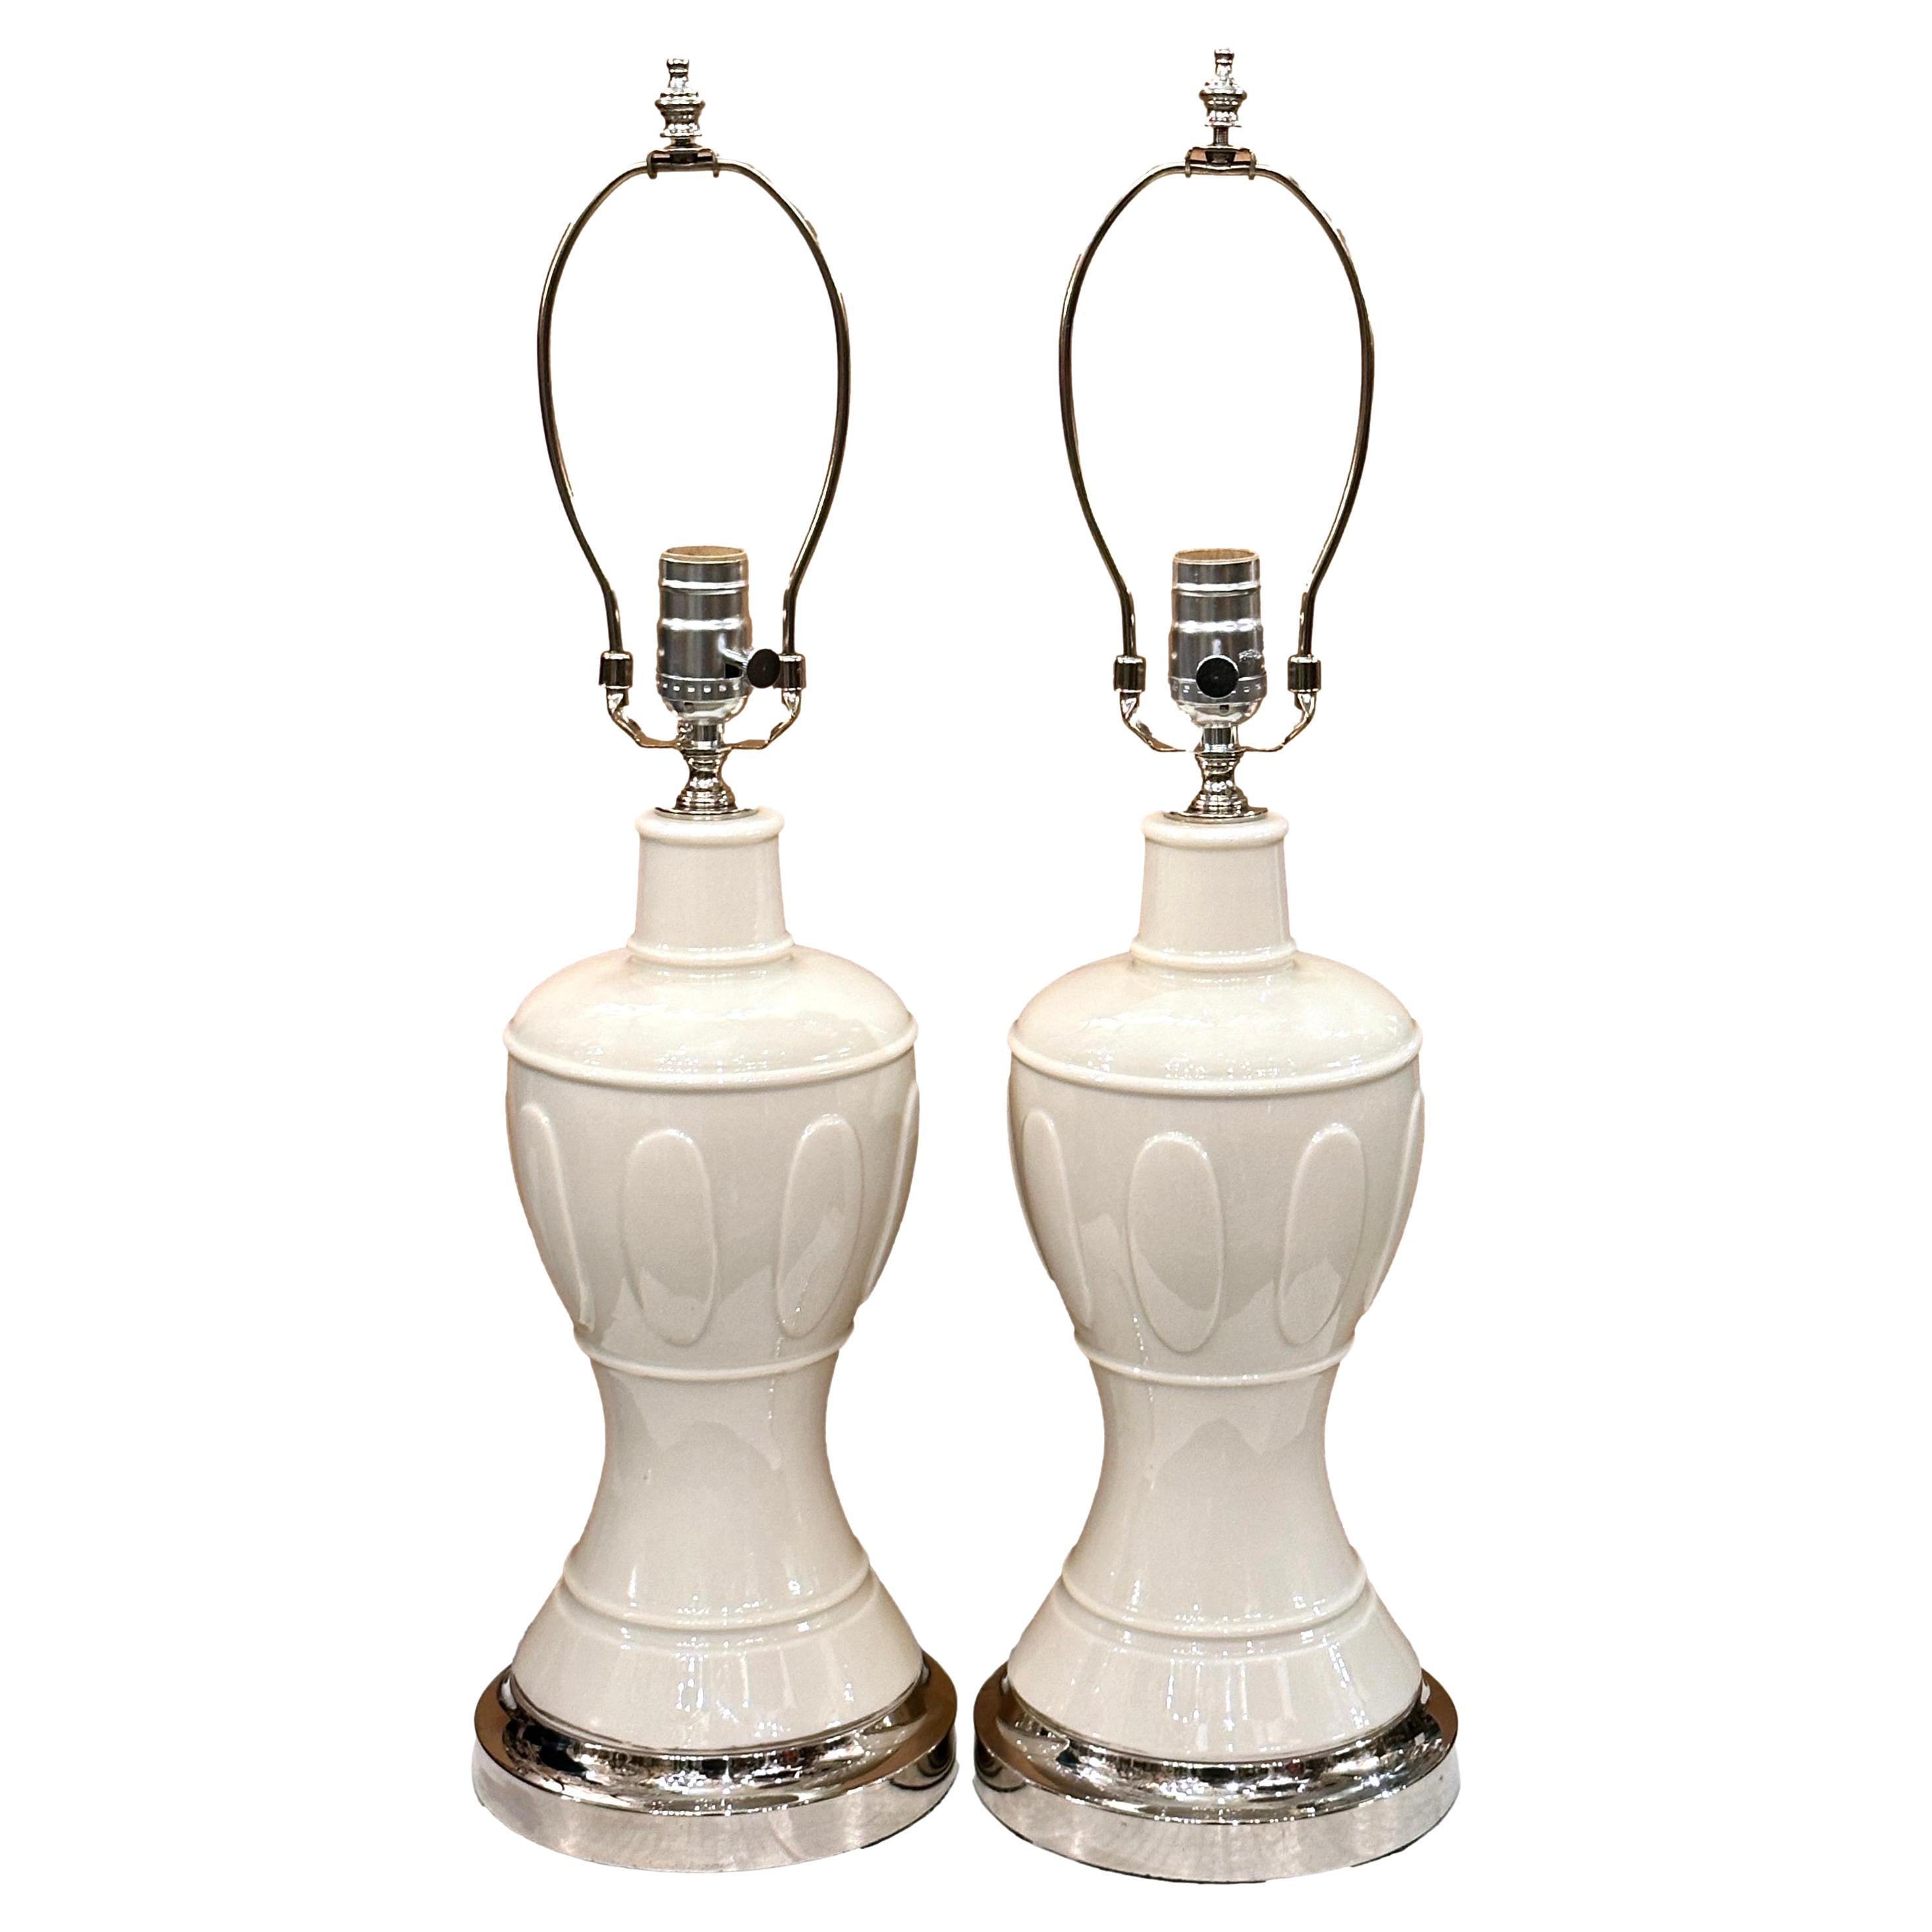 Pair of Cream Porcelain Table Lamps